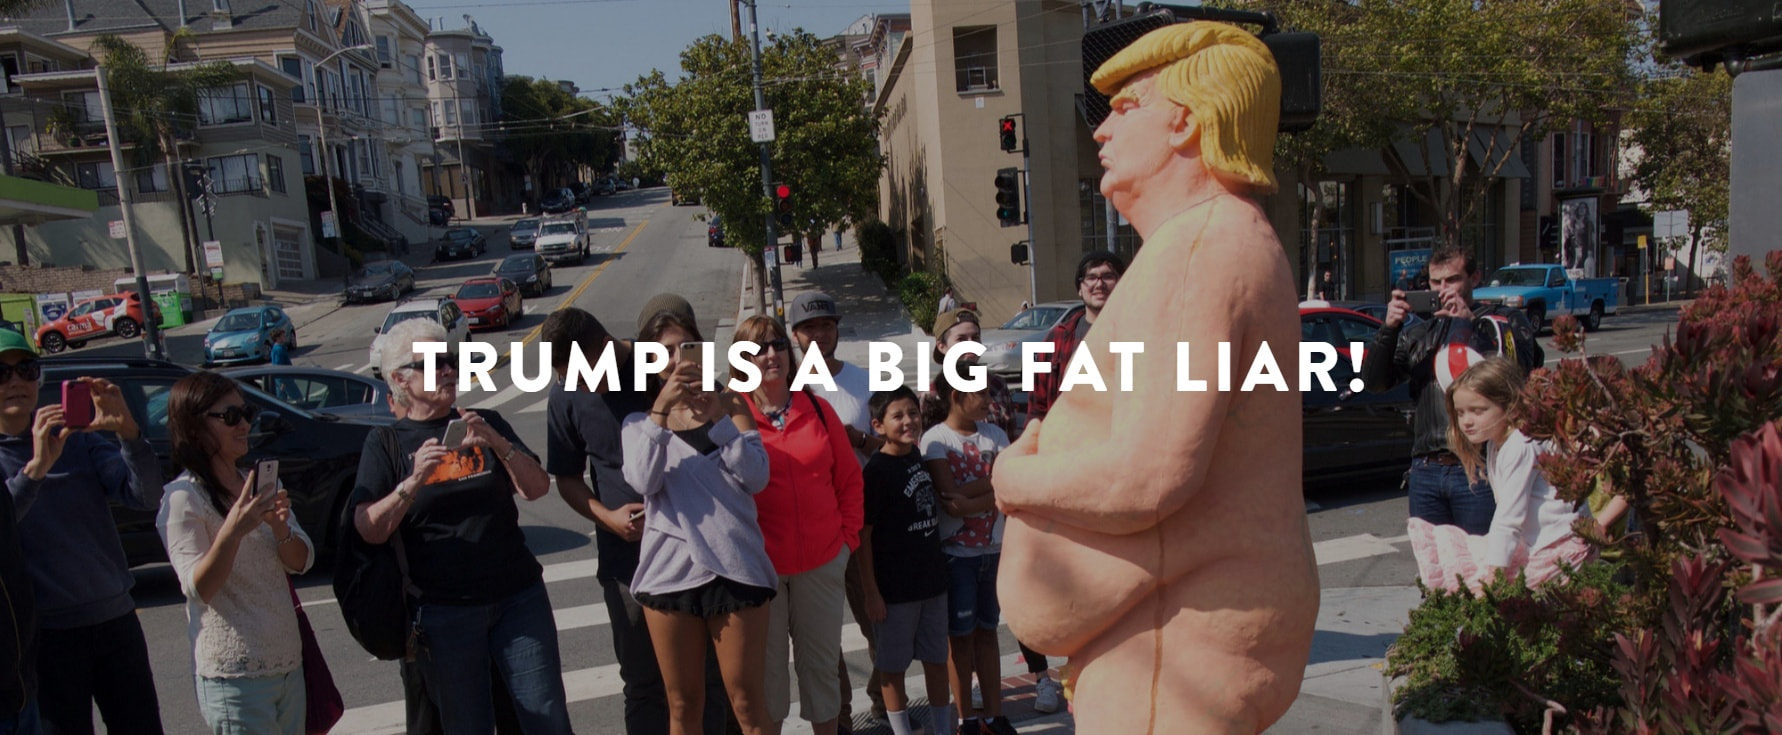 Trump is a Big Fat Liar! (image of naked statue of Trump from "The Emperor Has No Balls" project)